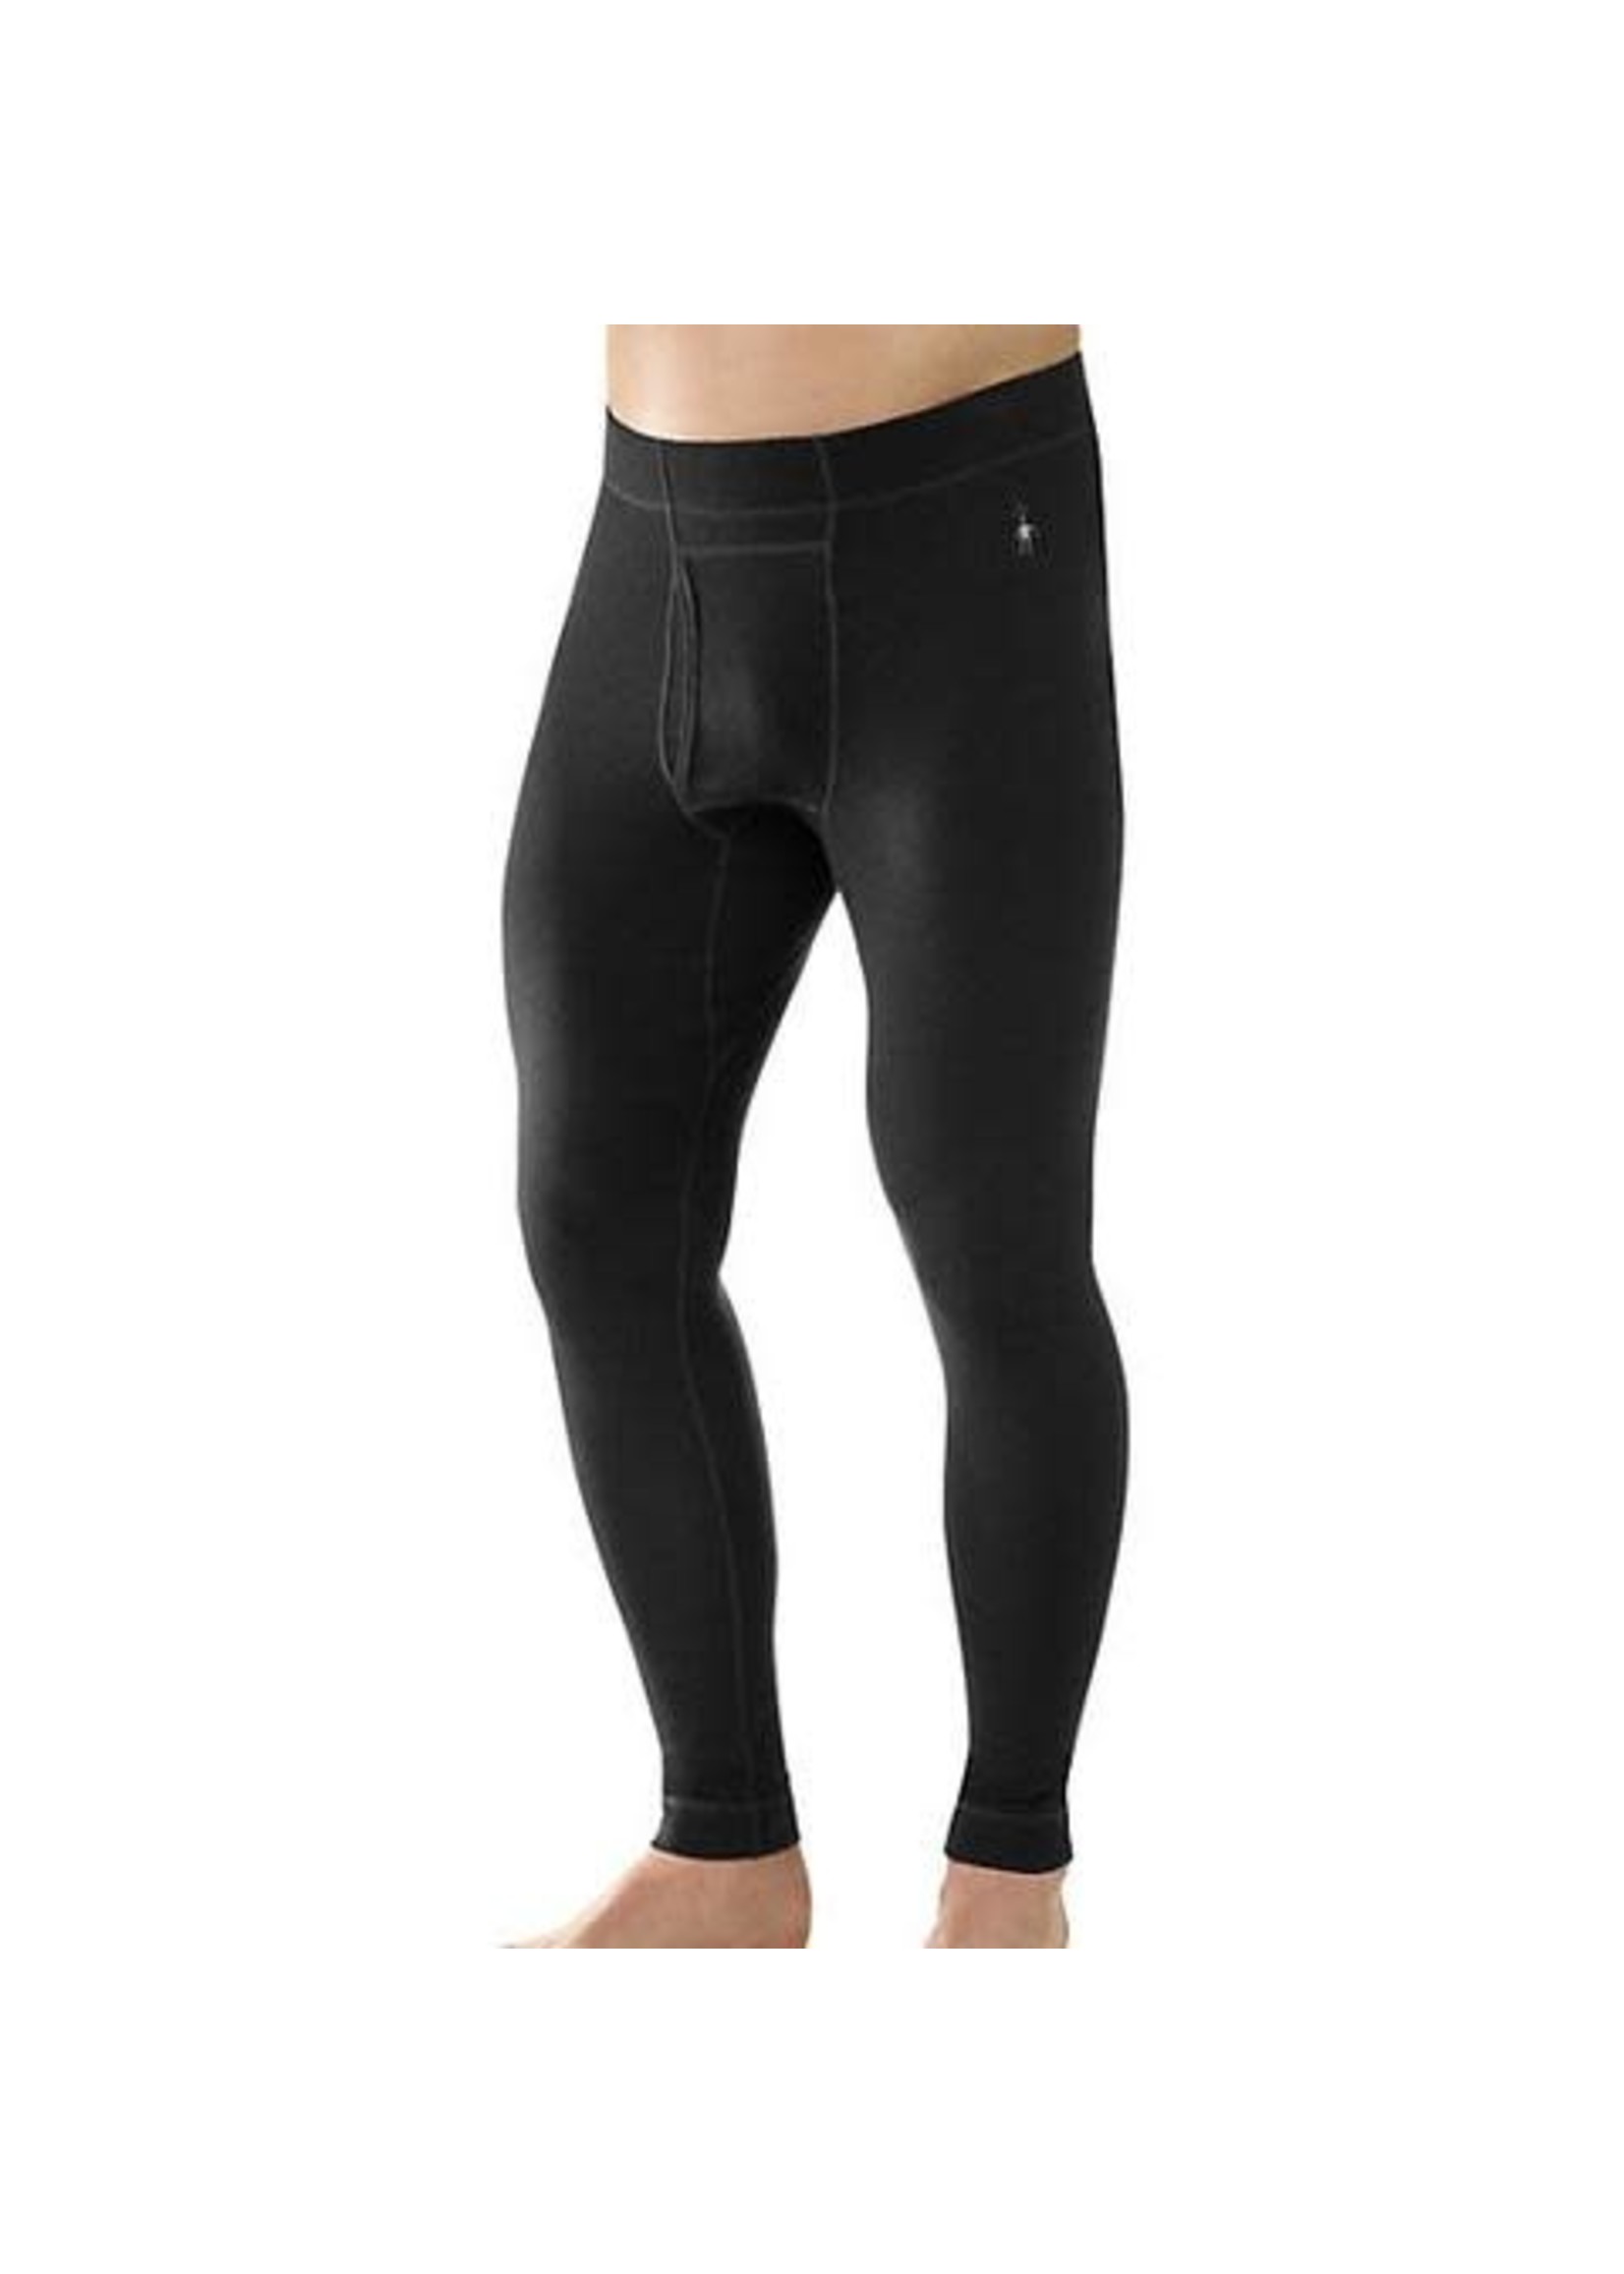 Smartwool Caleçons longs Midweight Bottom pour hommes